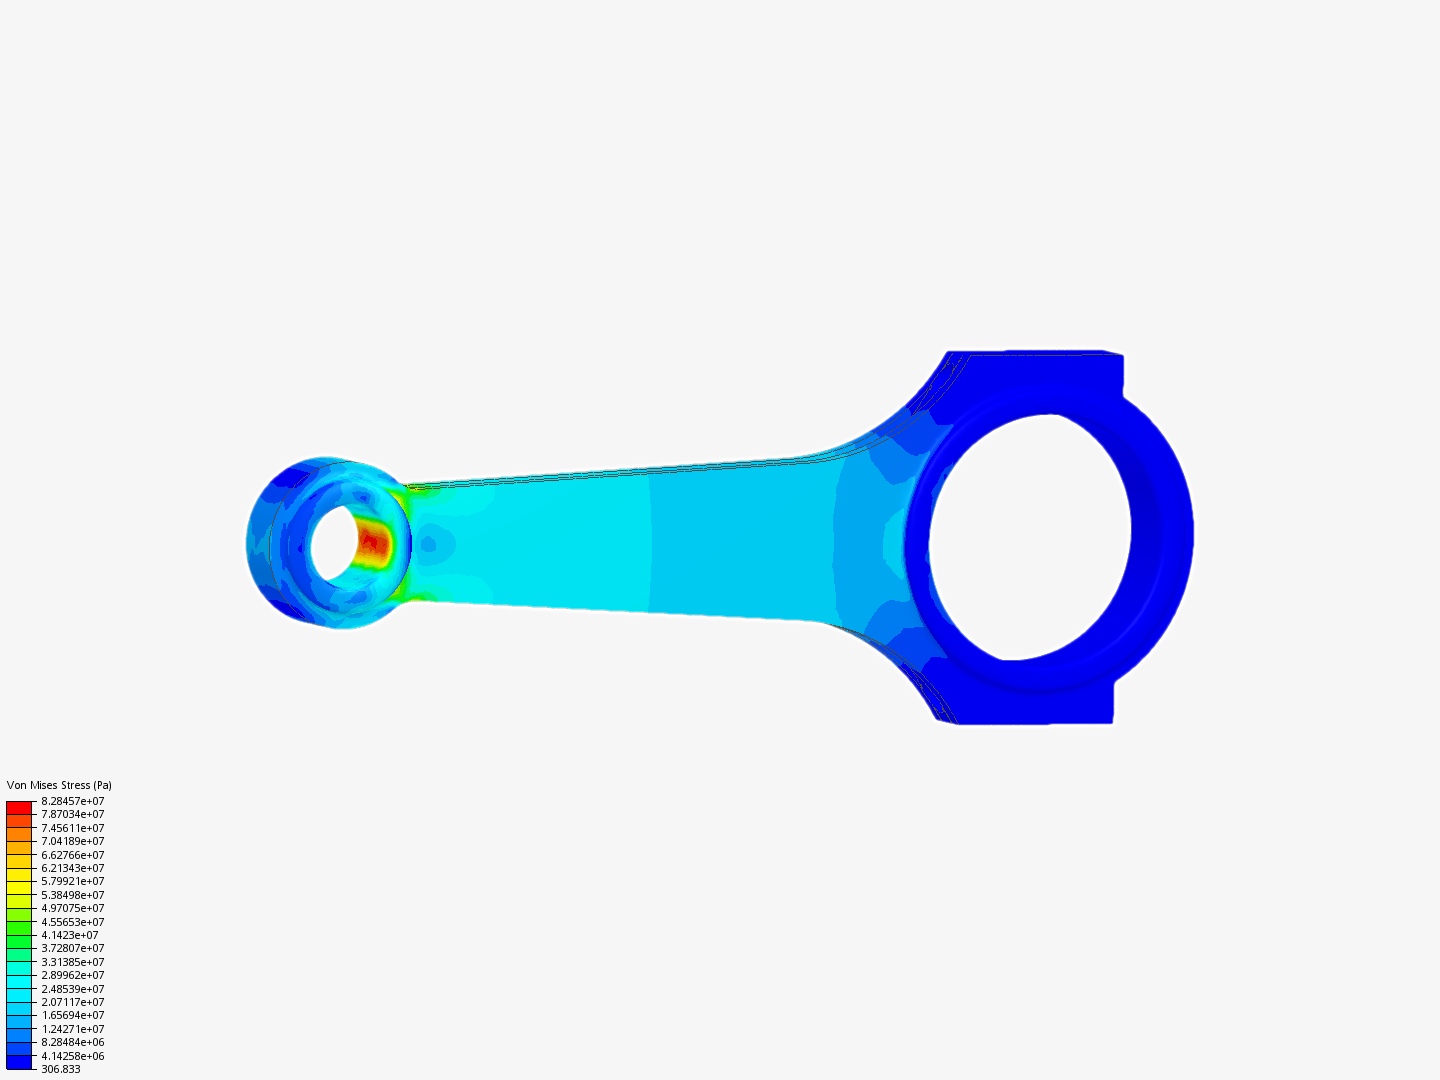 Connecting rod stress analysis - Copy image